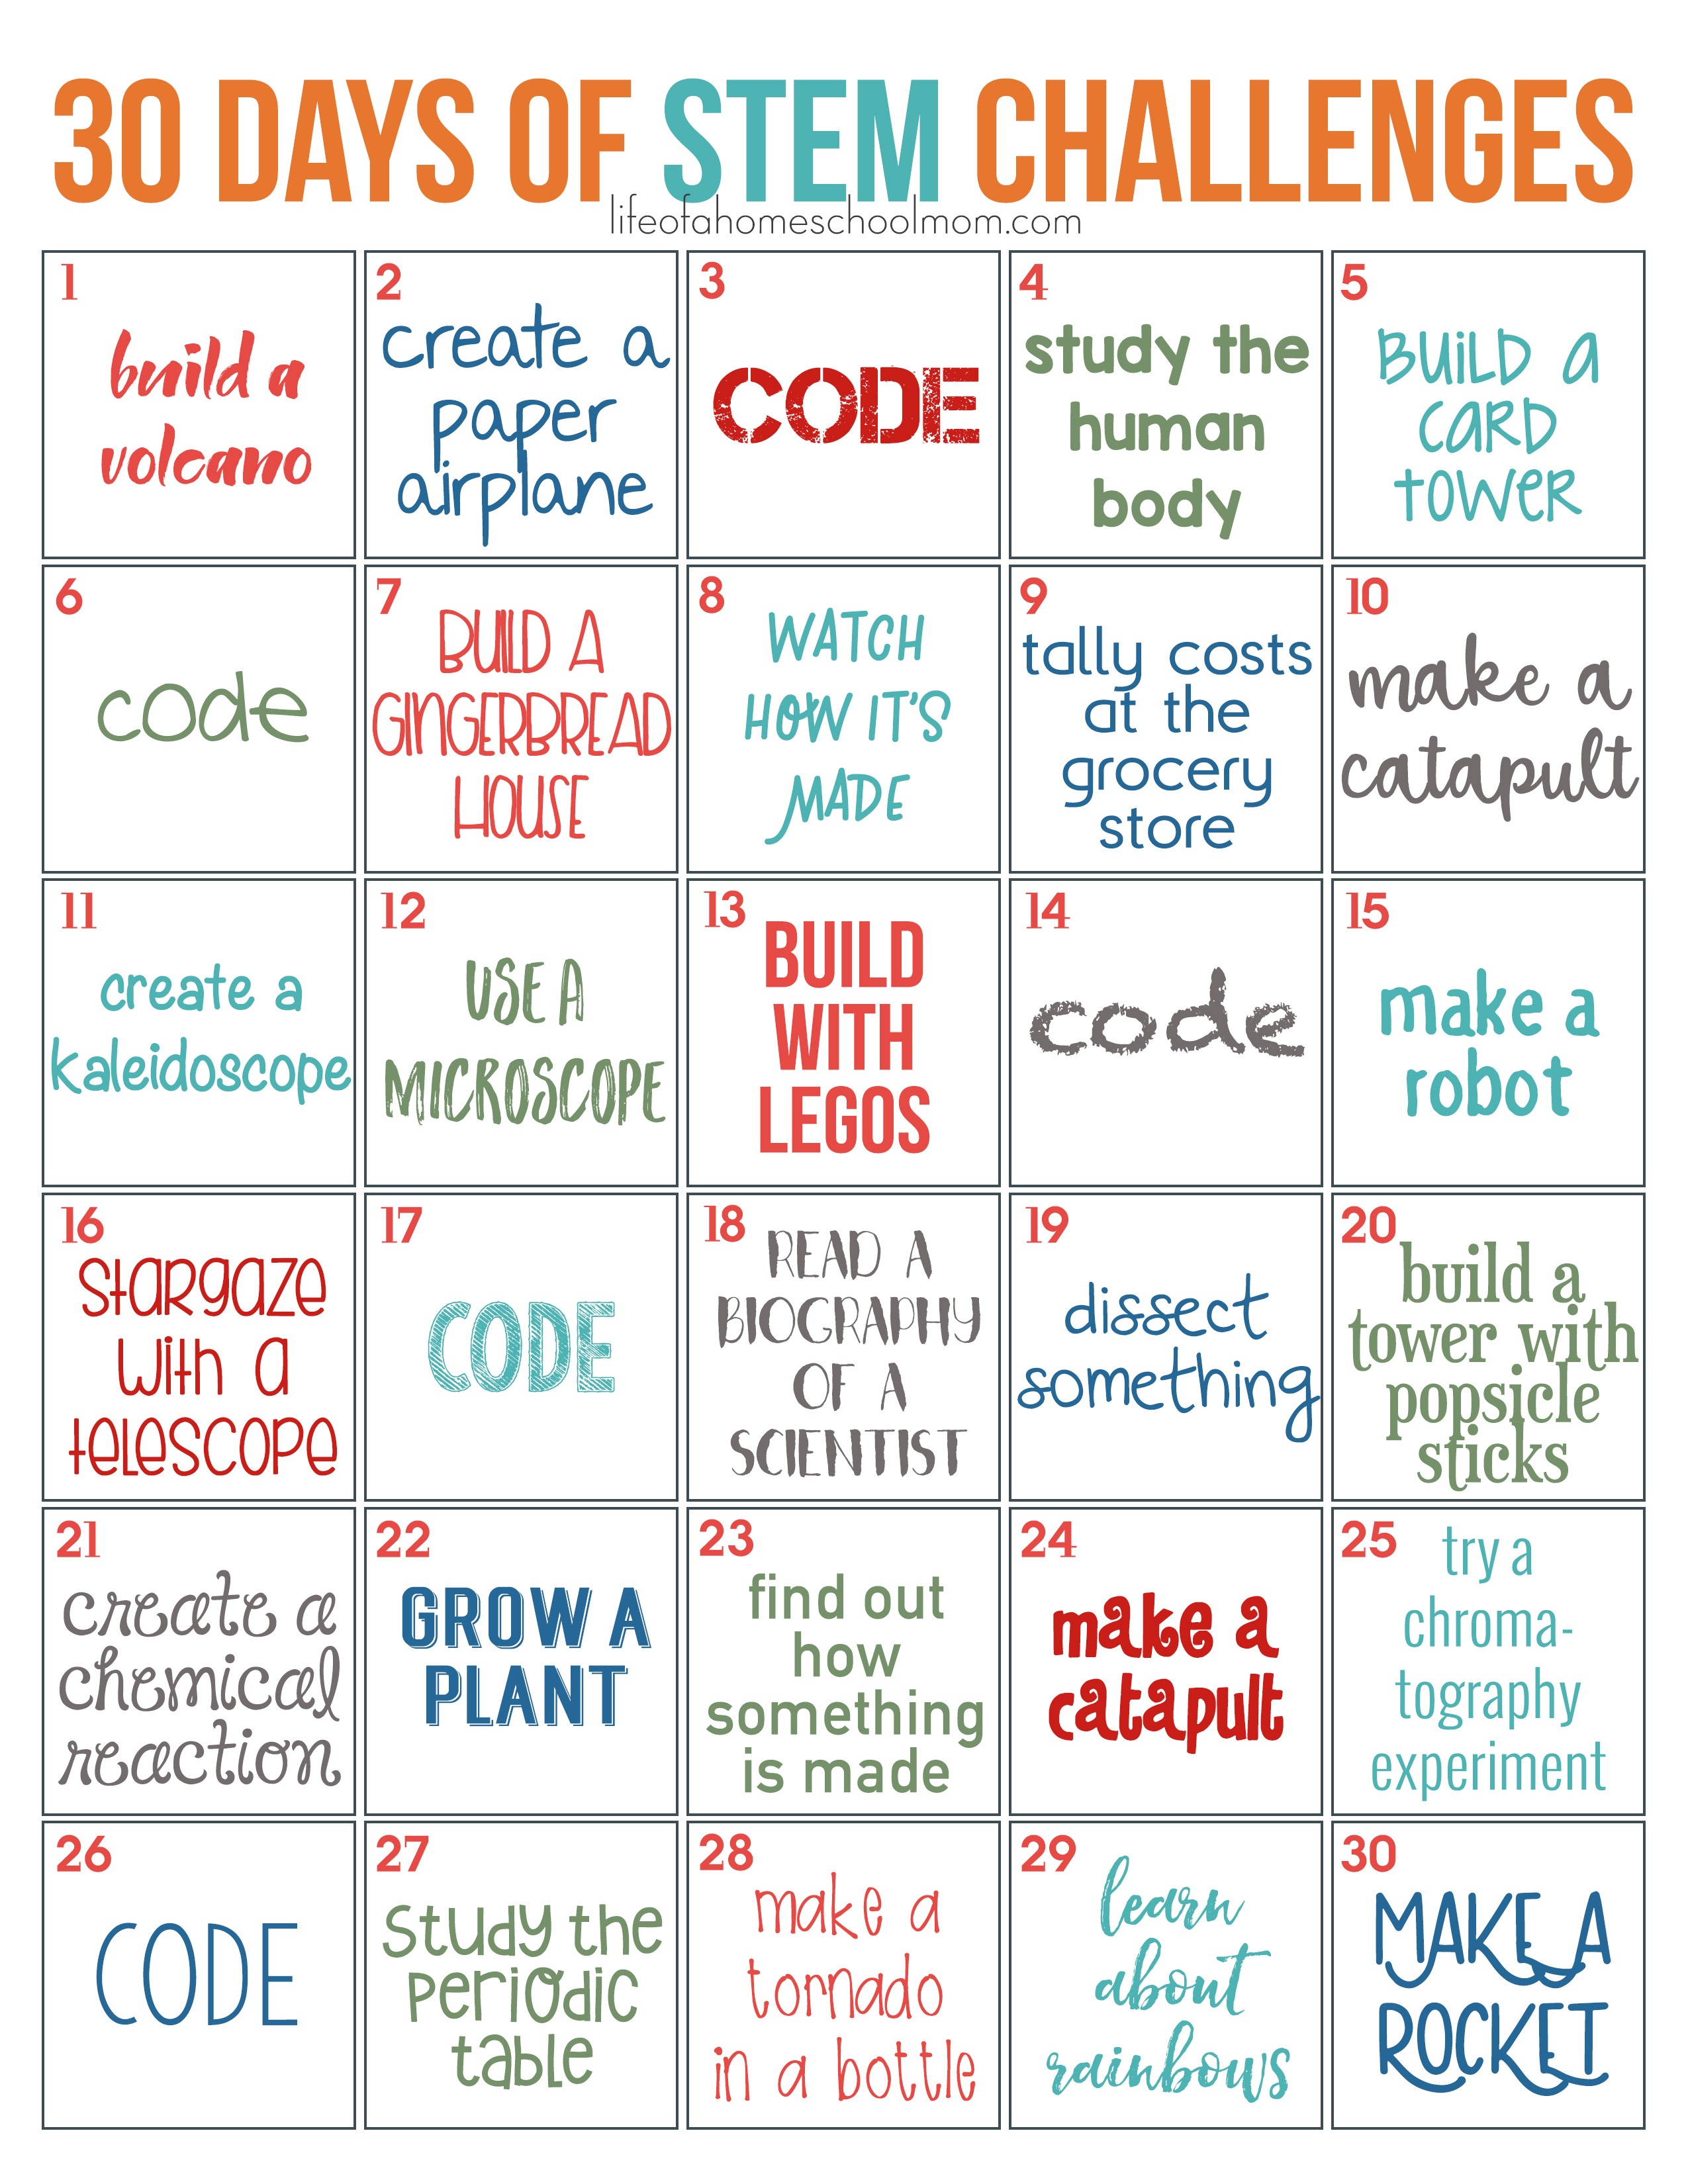 30 Days Of Stem Challenges - Free Printable! - Life Of A Homeschool Mom - Free Printable Stem Activities